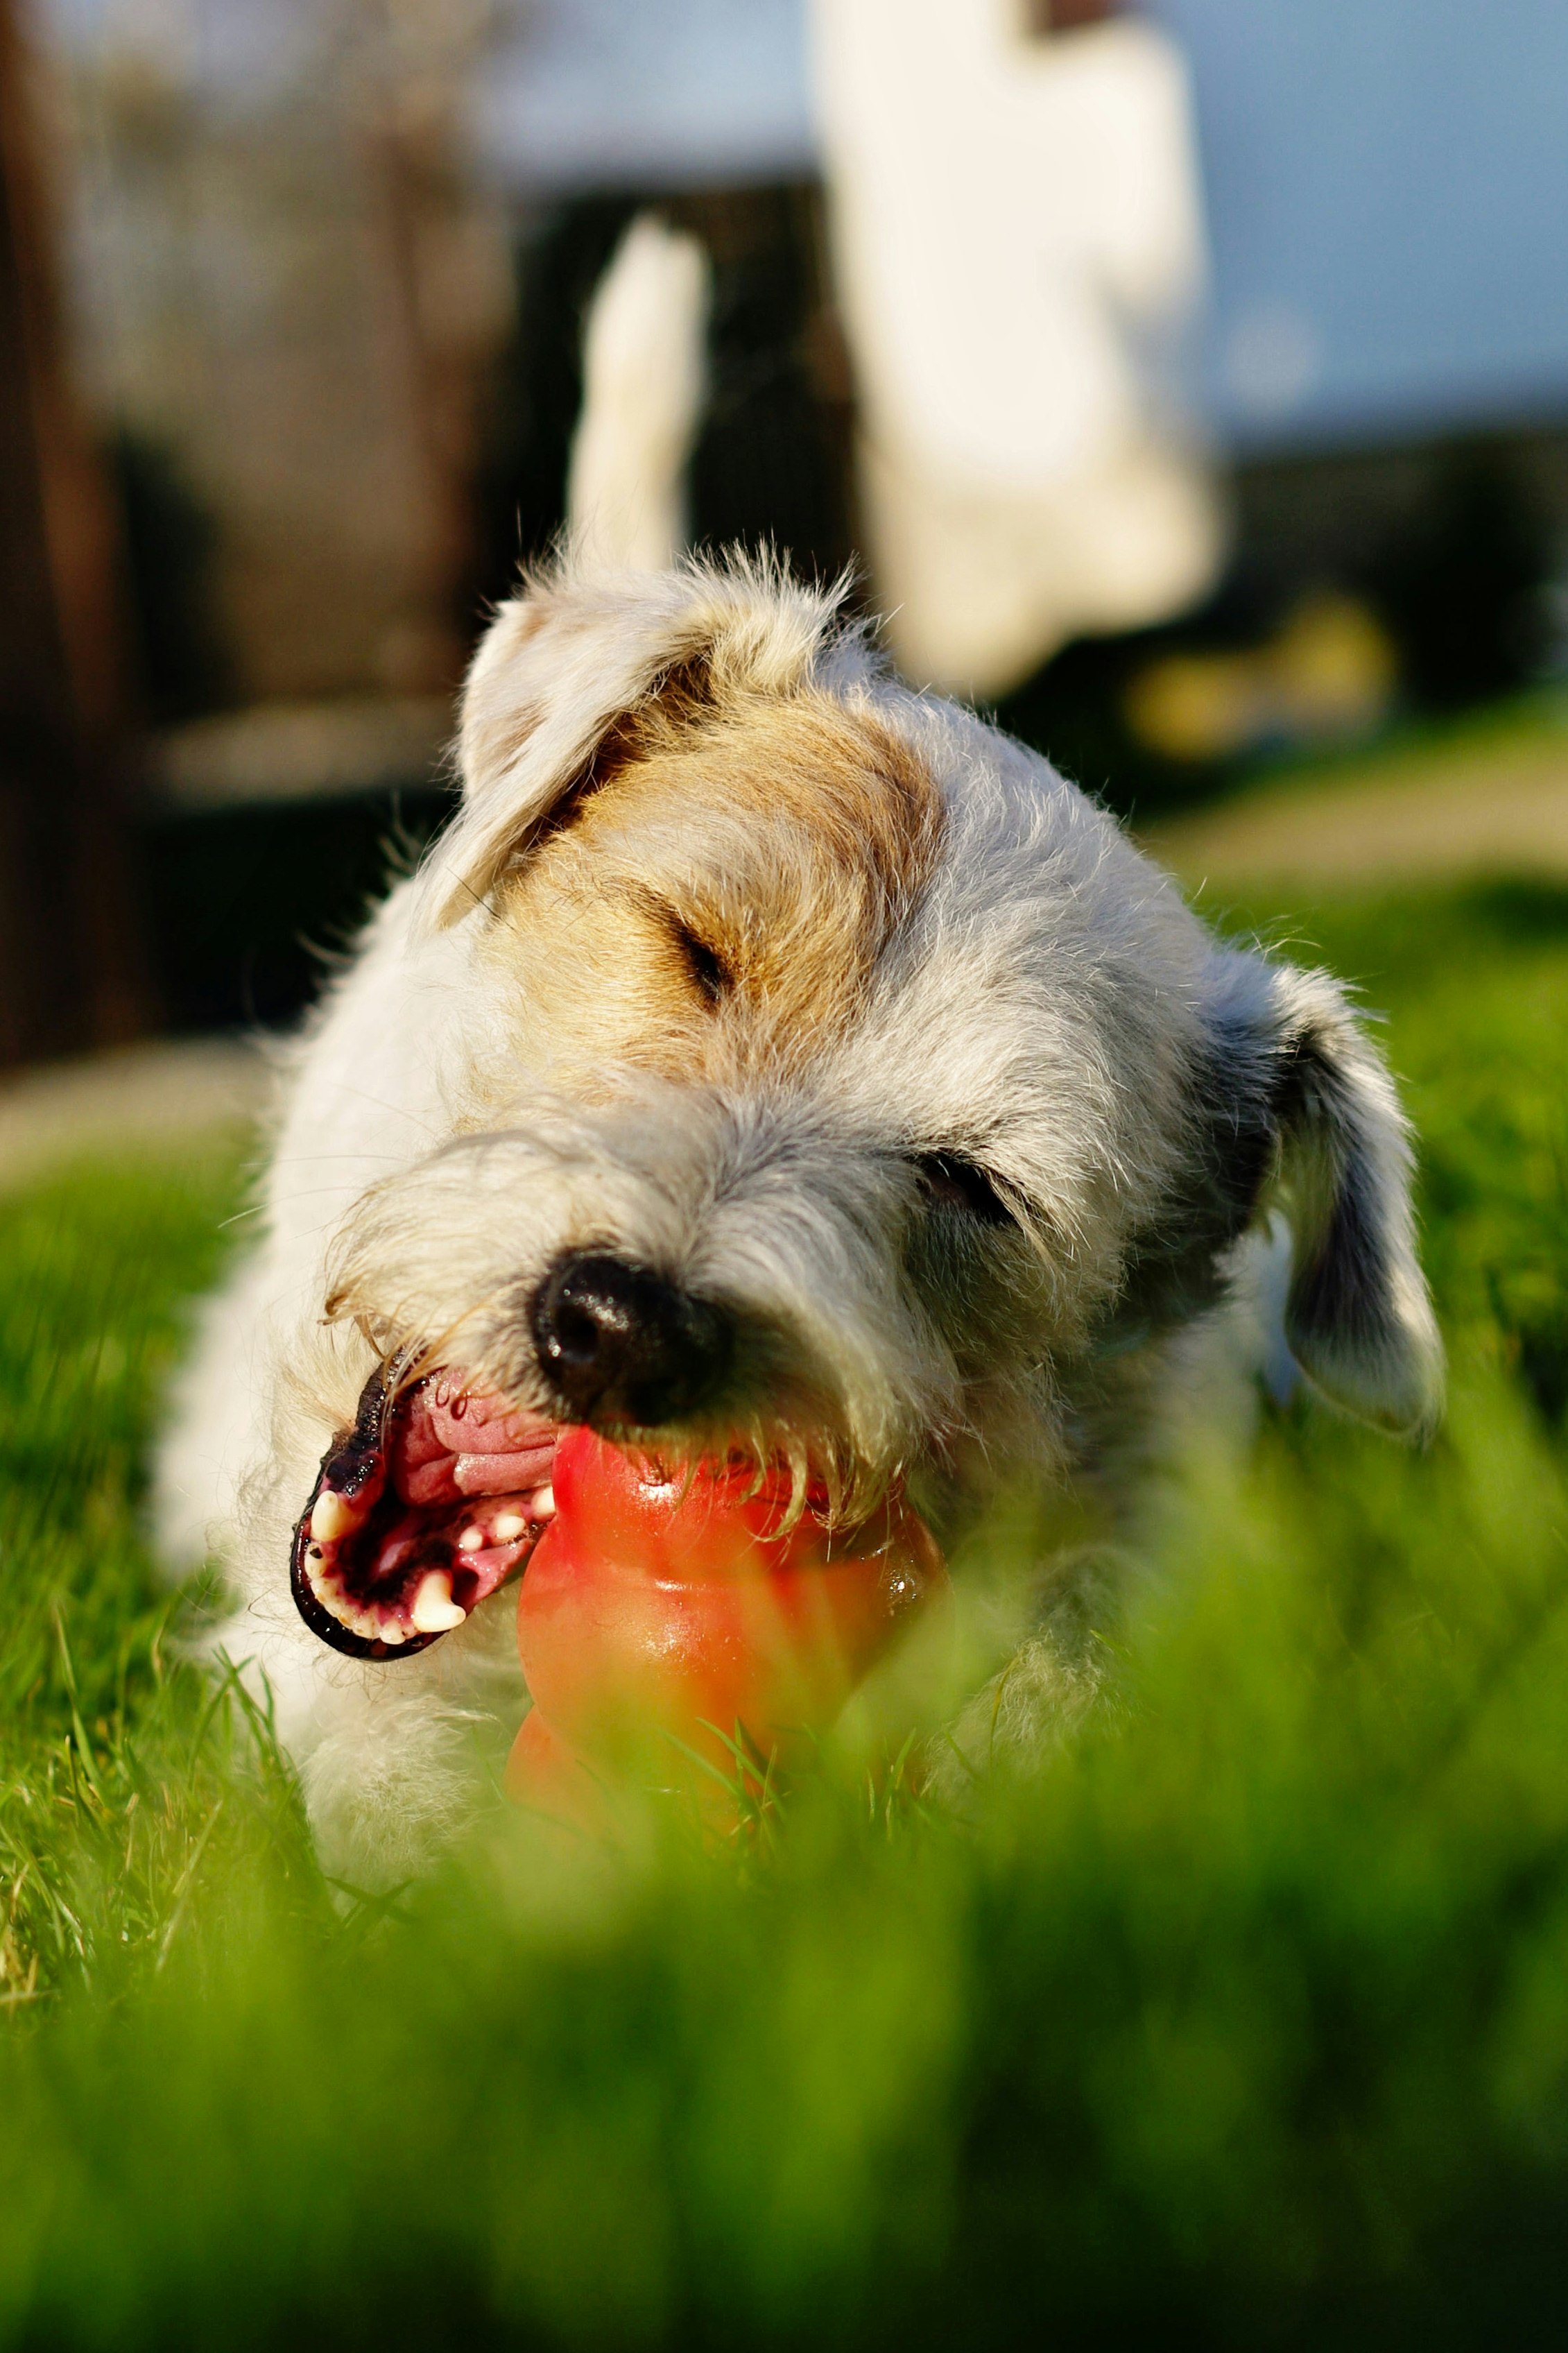 white and brown short coated dog biting red plastic toy on green grass during daytime